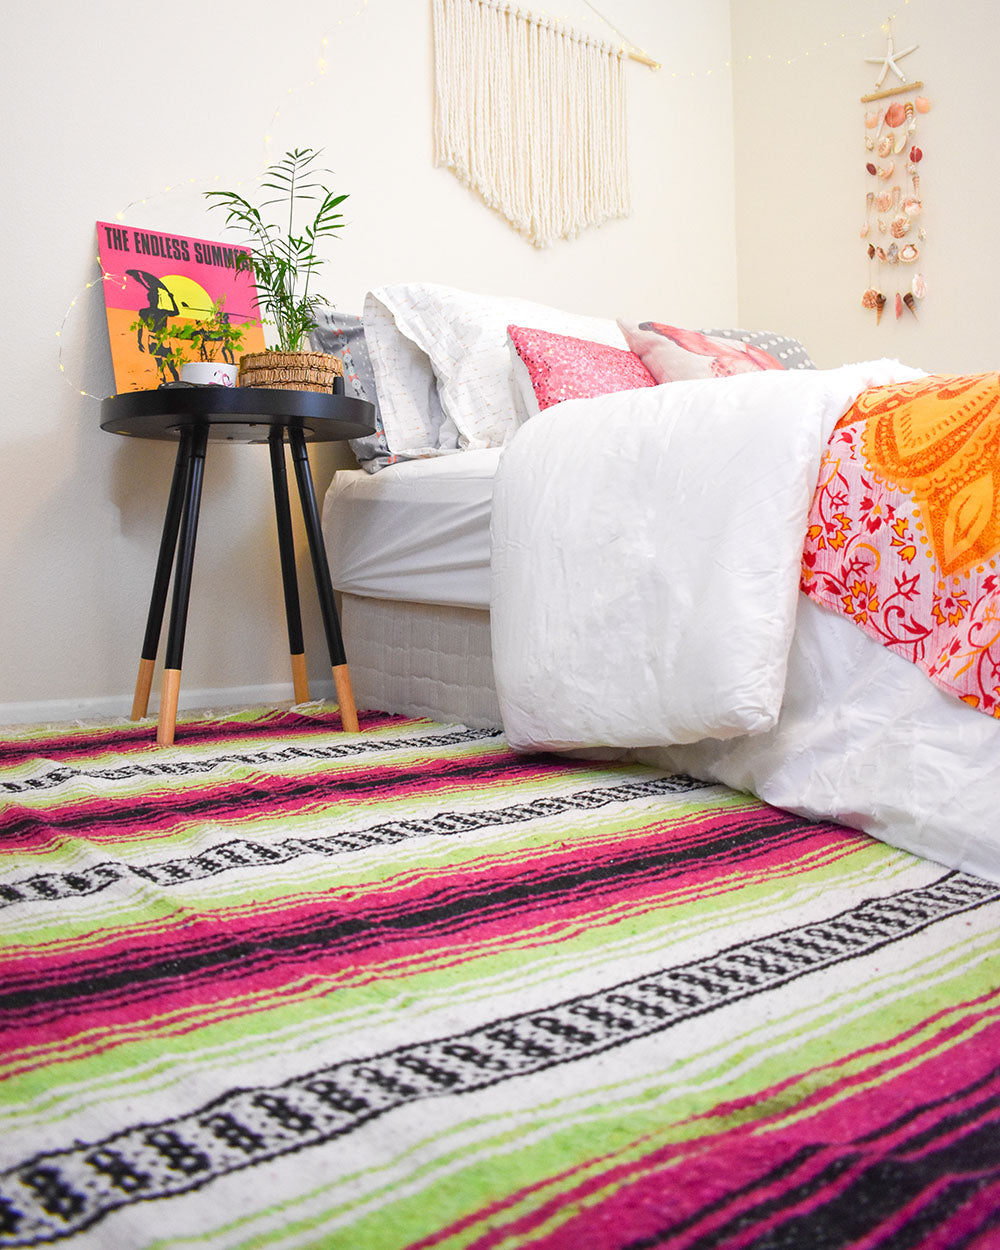 The Bohemian Fiesta Blankets are a true multipurpose blanket. Use it as a floor rug, a throw blanket on your bed or chair, hang on the wall, or take it with you to a grassy area for an outdoors study session or just to lay back relax and look up at the sky. 